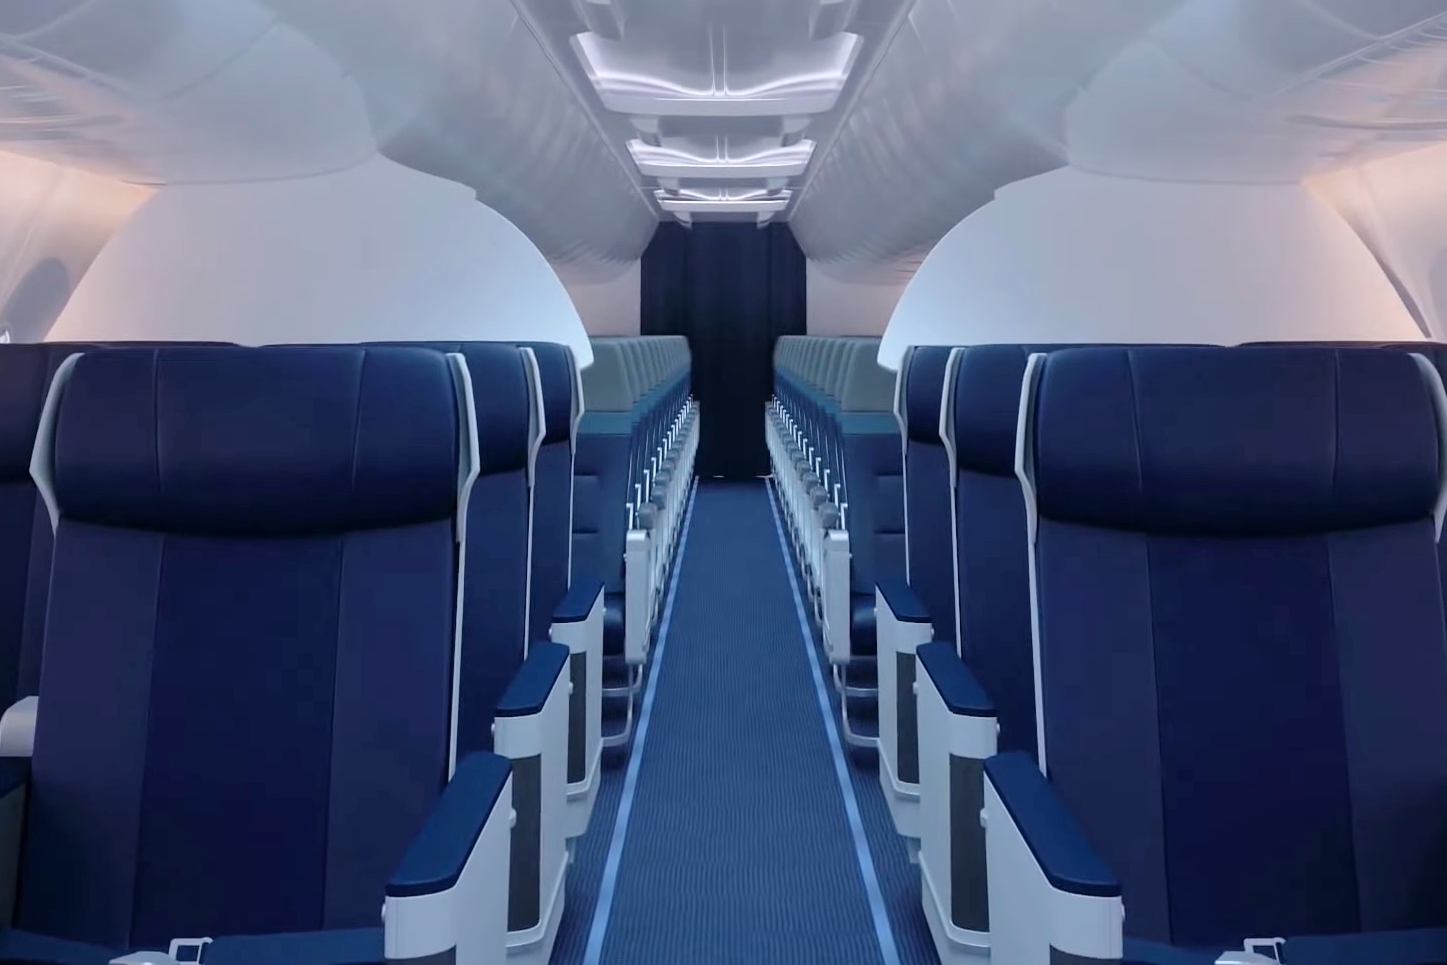 The new design features 12 Business Class seats and 162 Economy Class seats in a 2-2 and 3-3 seat configuration respectively. Click to enlarge.